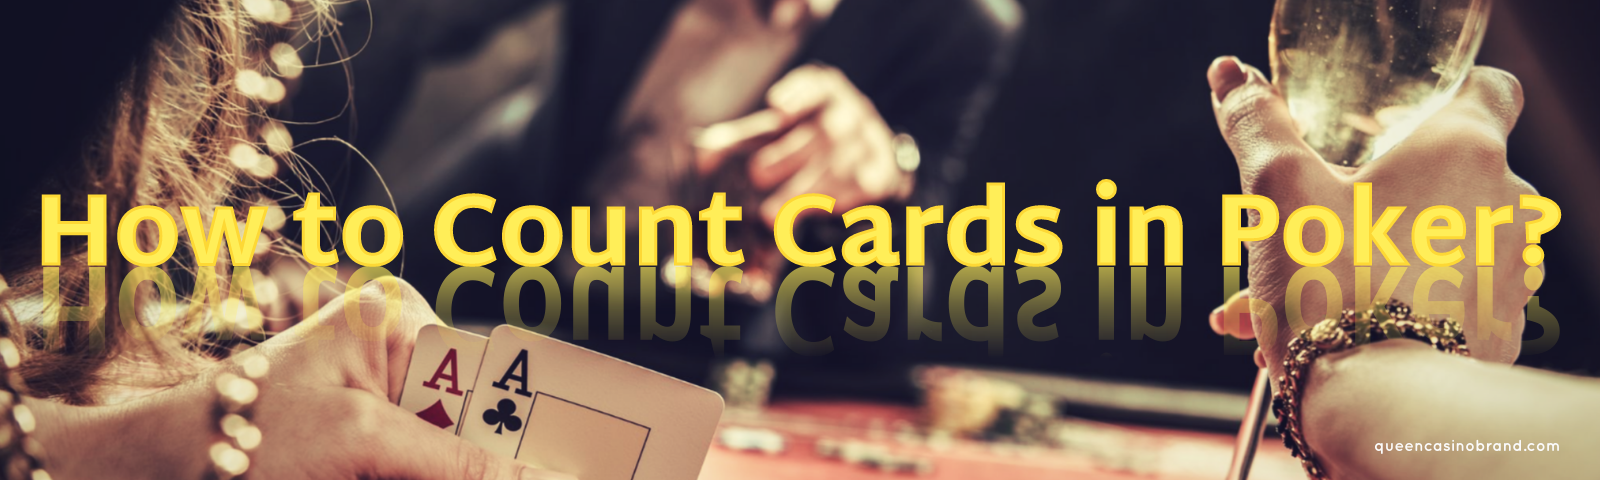 Guide on How to Count Cards in Poker like a Pro | Queen Casino Brand